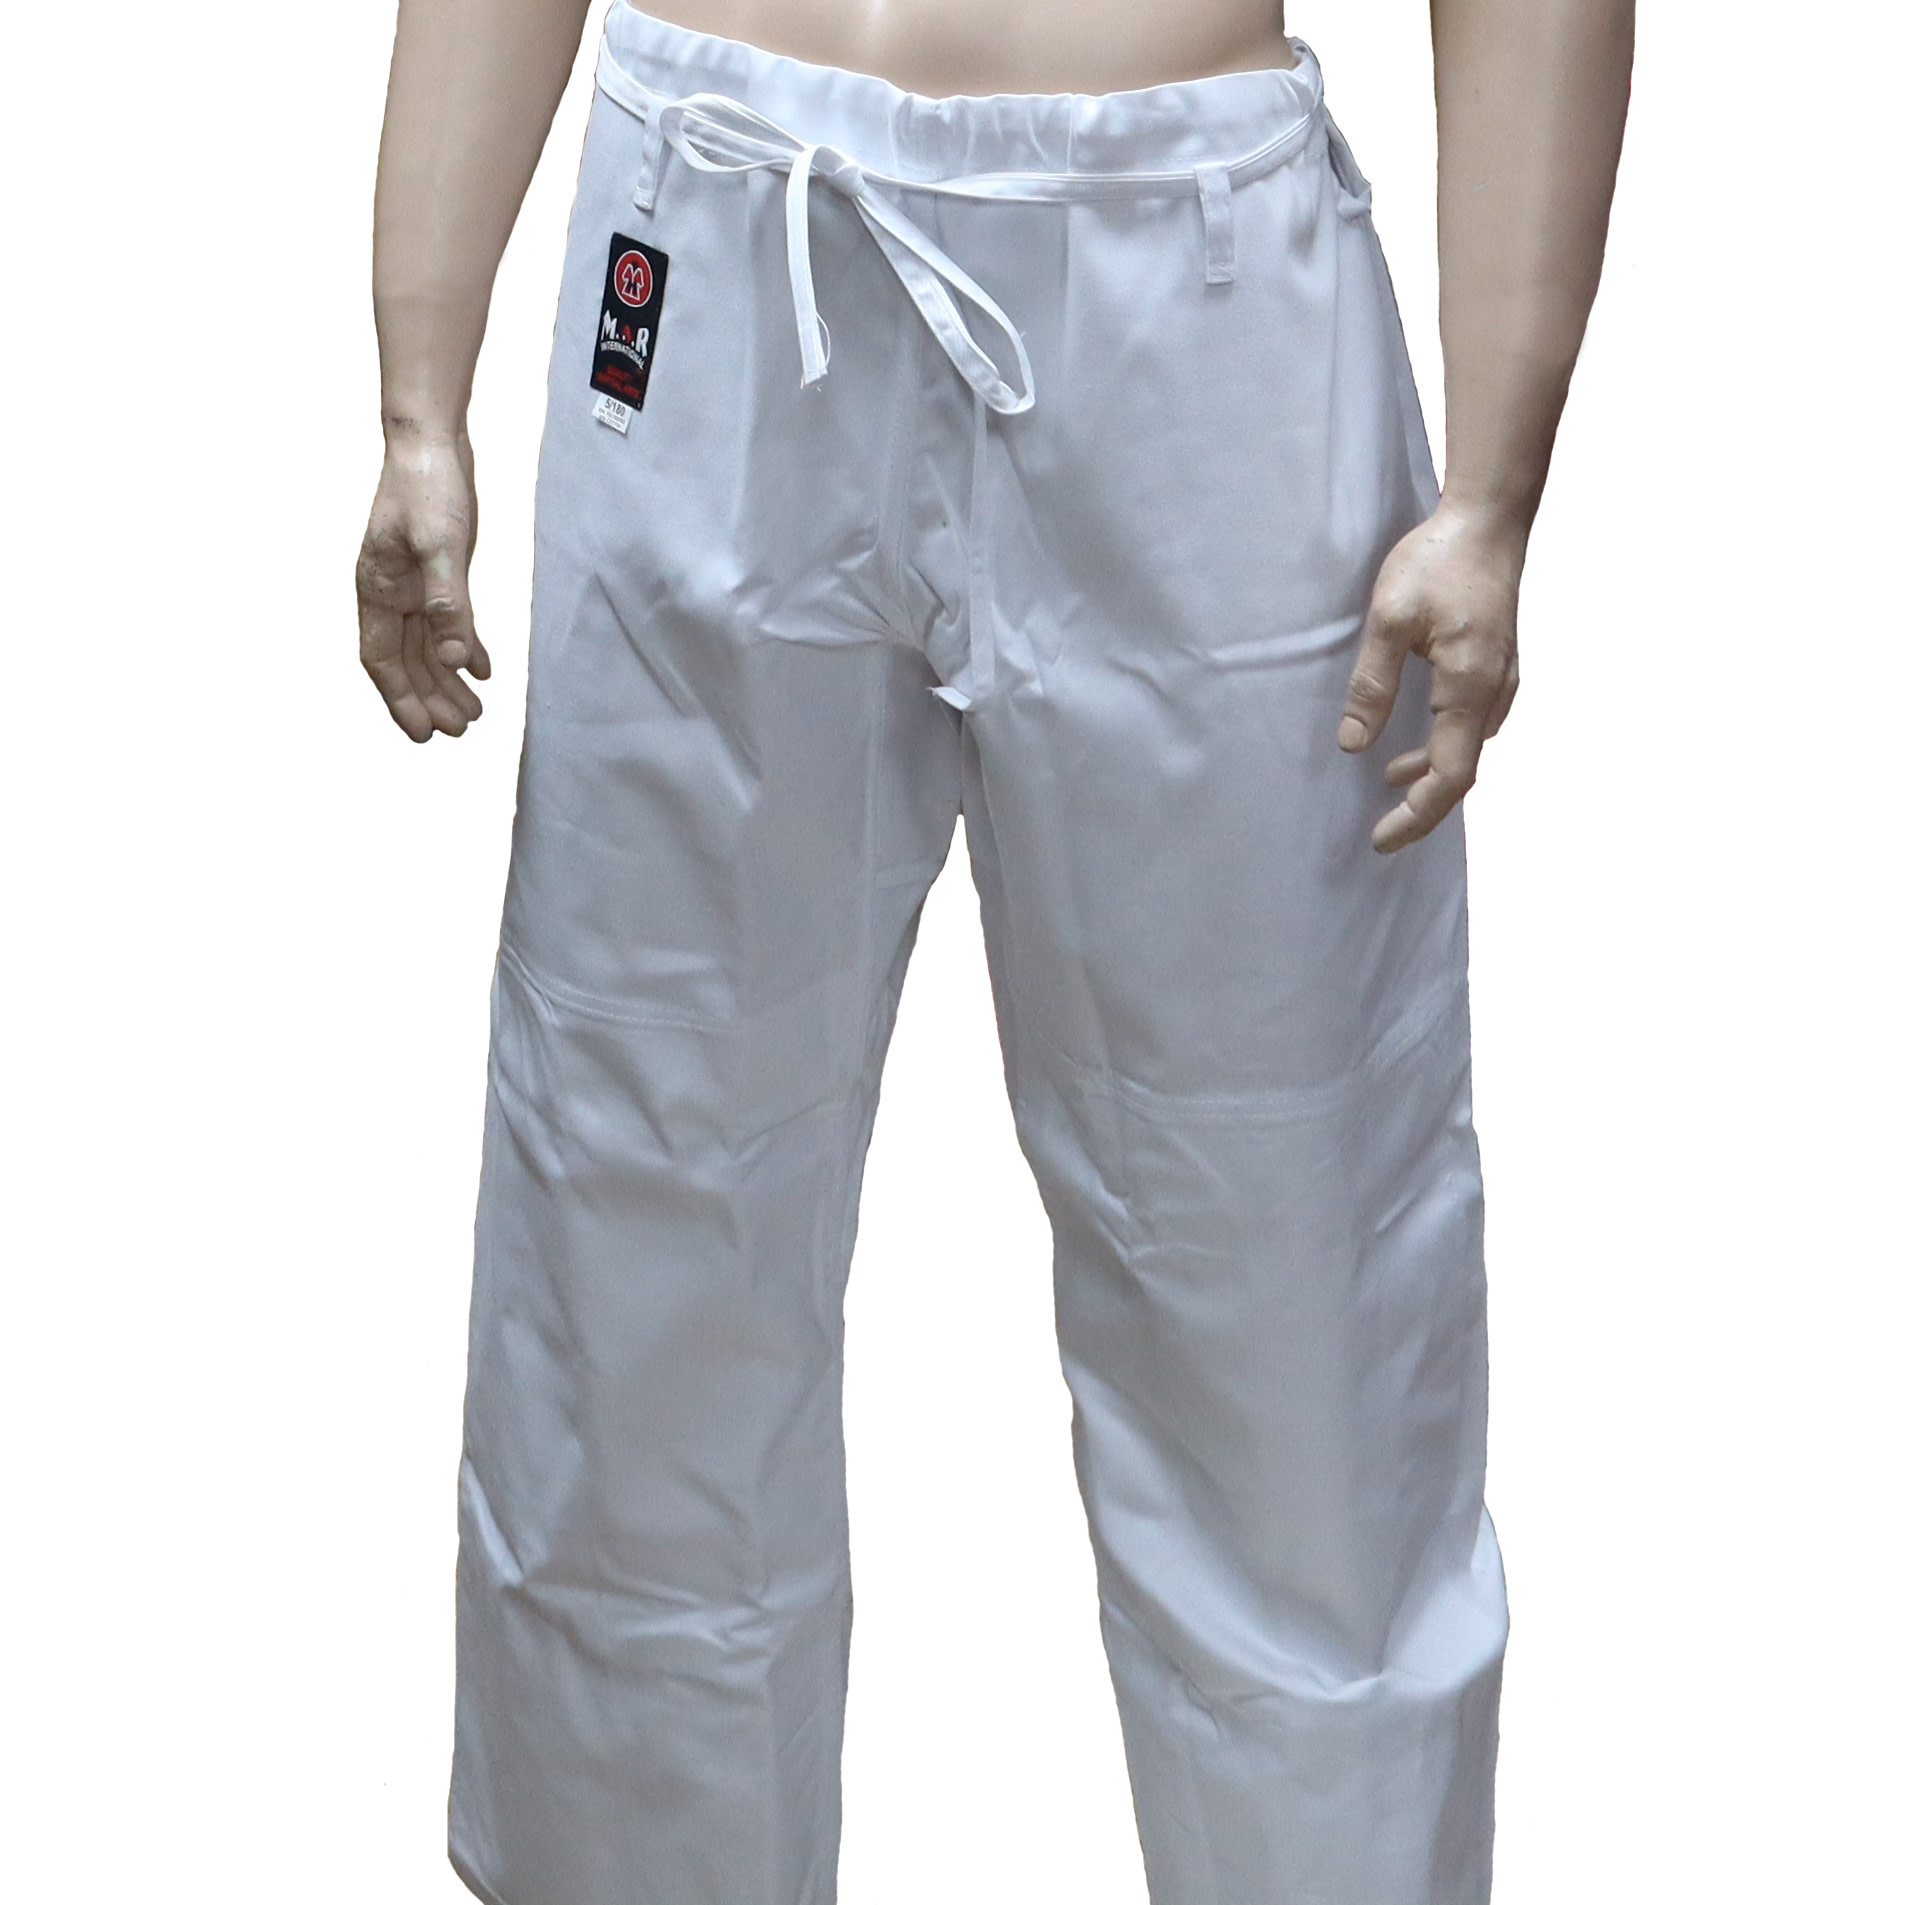 White Judo Trousers are perfect replacement Gi bottoms - Enso Martial Arts  Shop Bristol